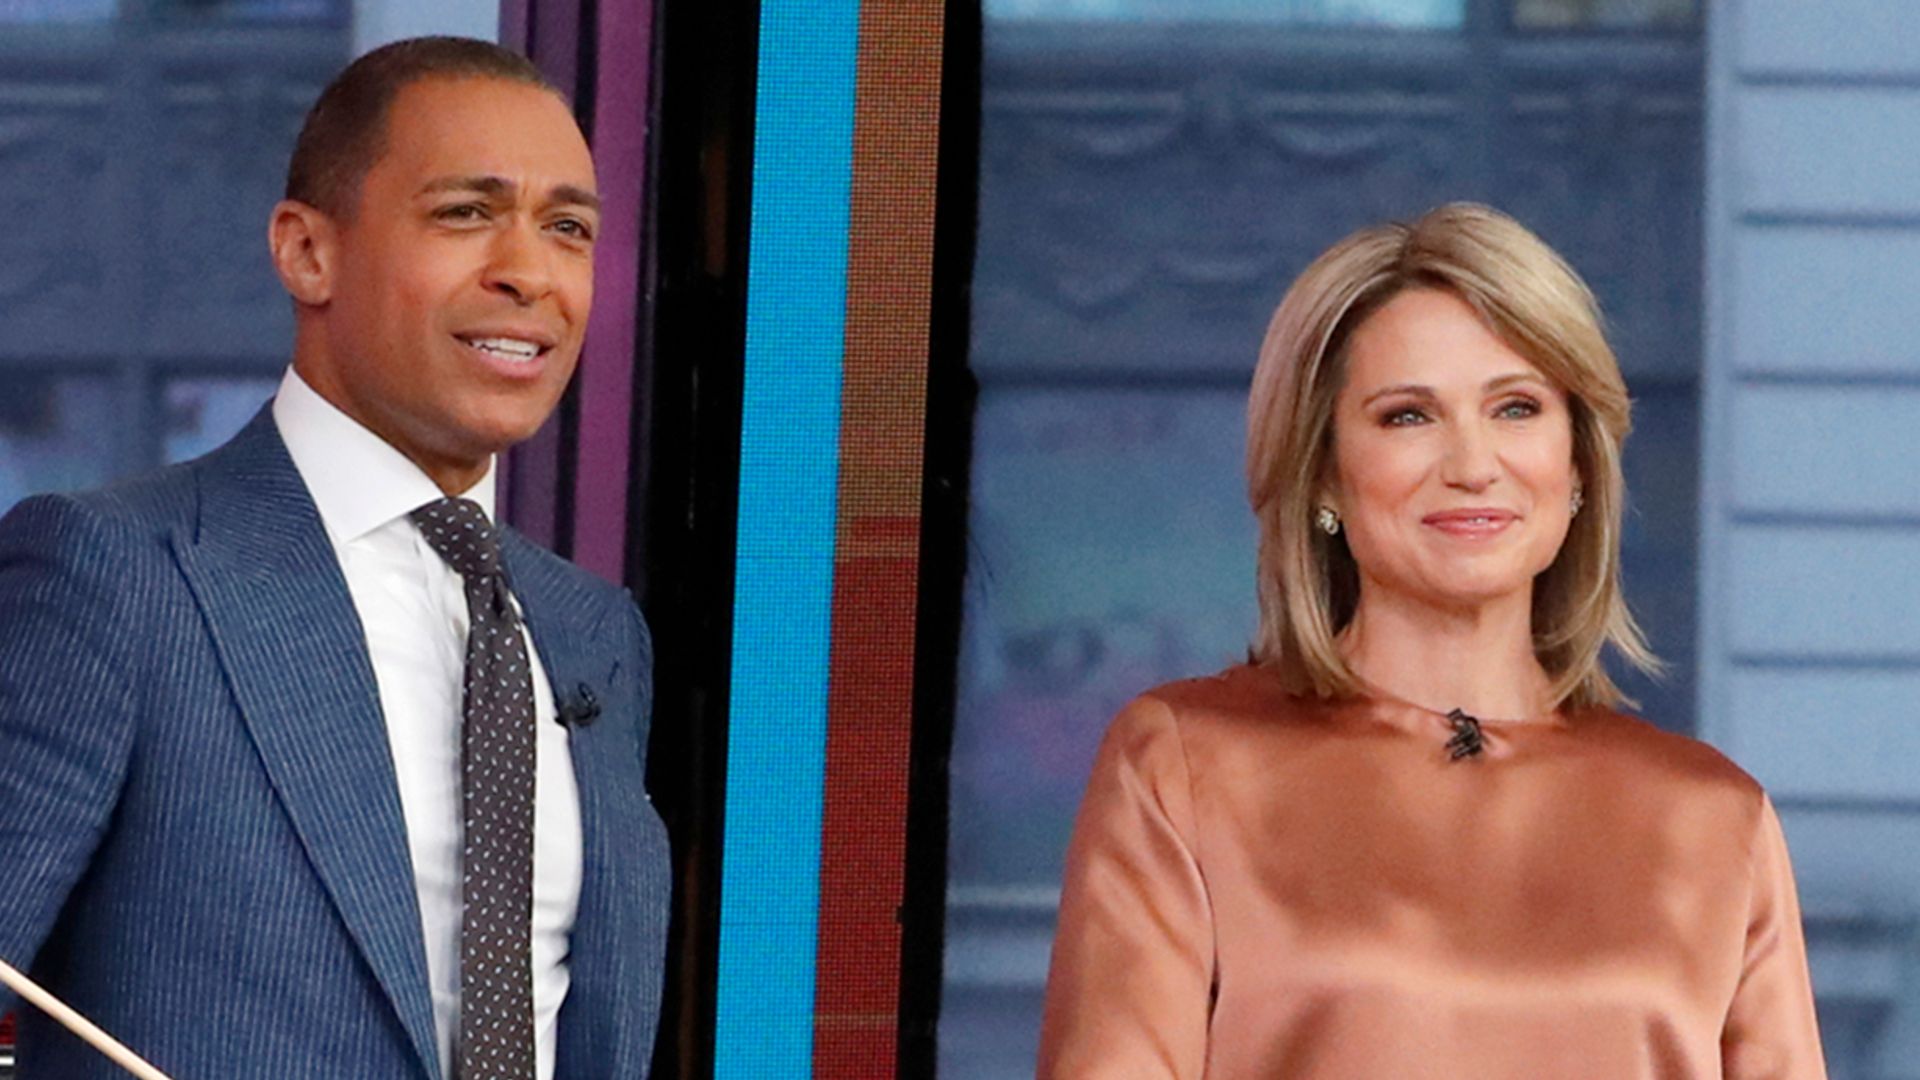 Amy Robach and T.J. Holmes on GMA